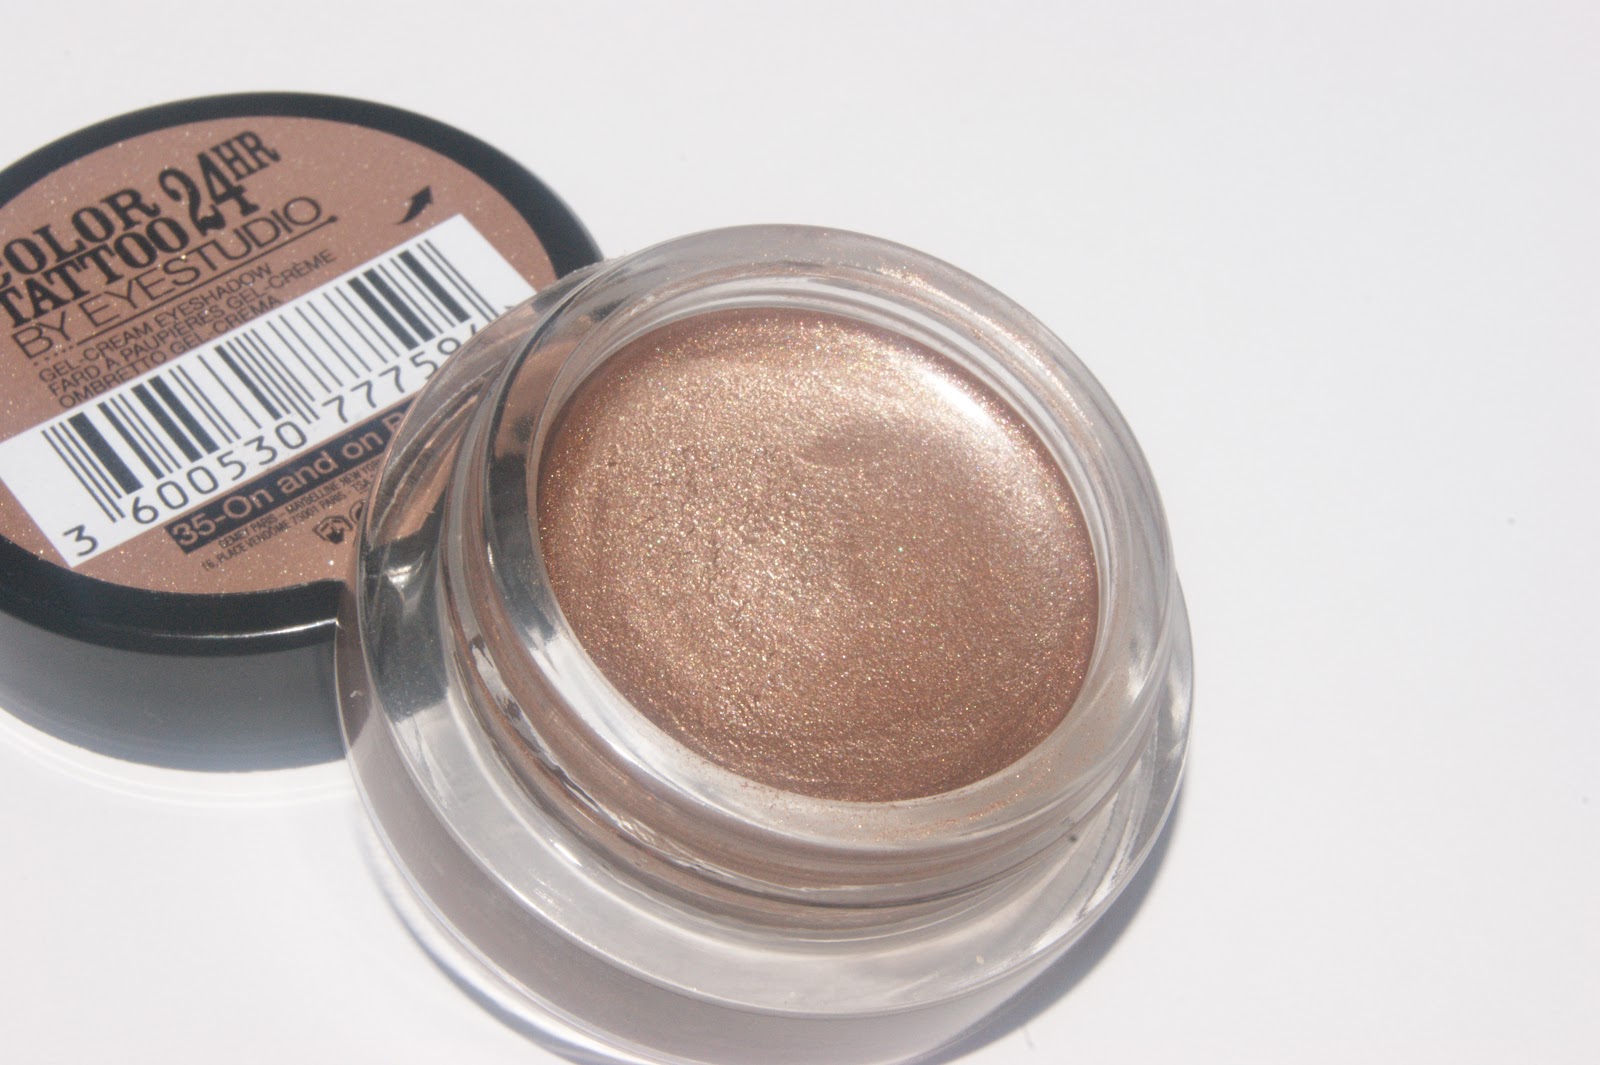 maybelline-color-tattoo-24hr-eyeshadow-on-and-on-bronze-review-006